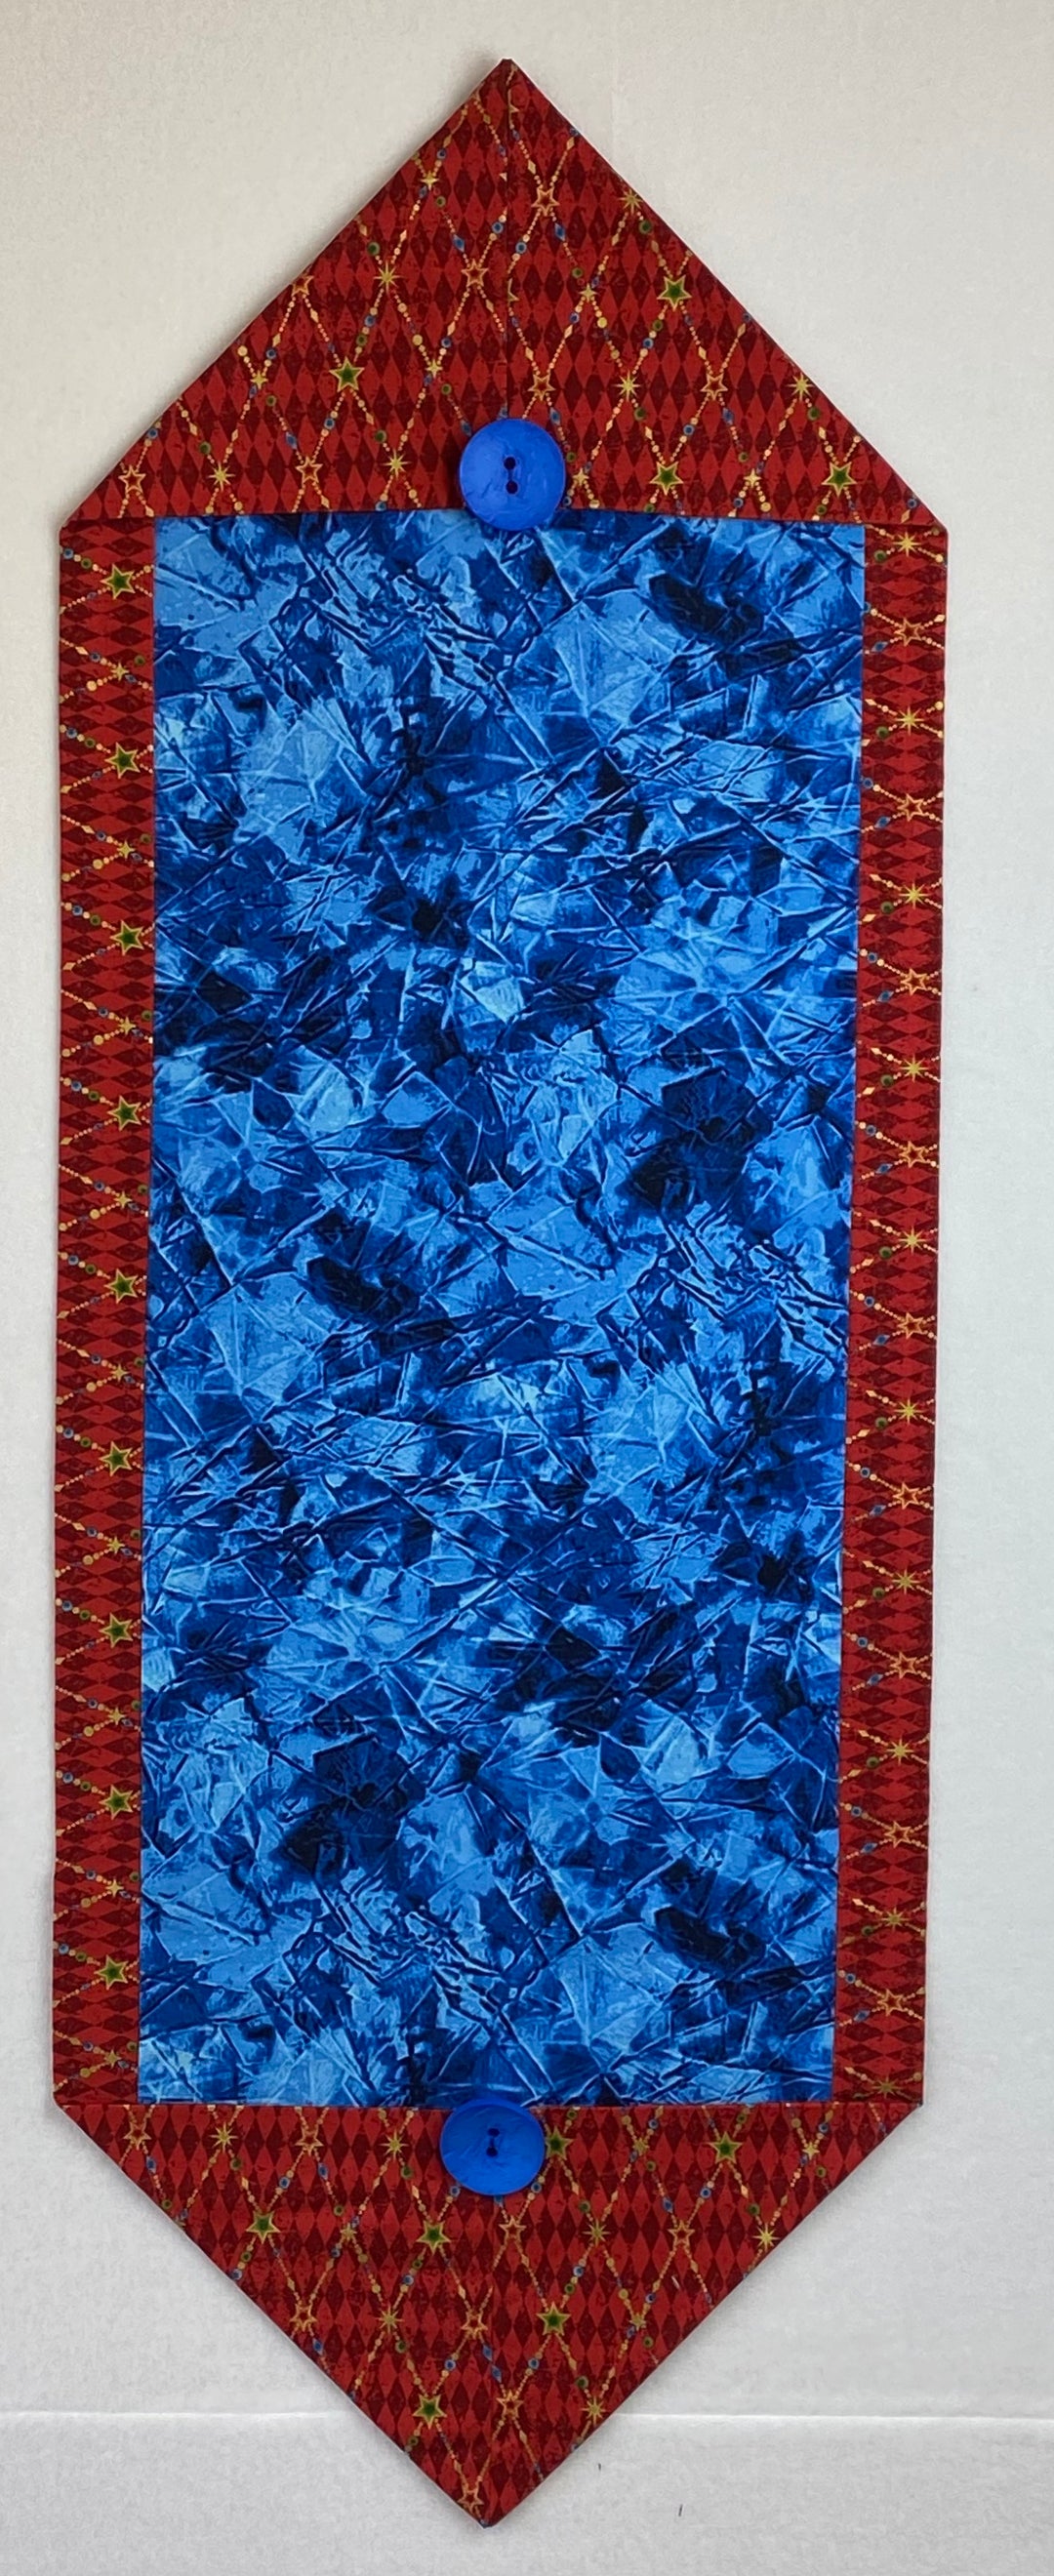 Finished Table Runner - Red and Blue